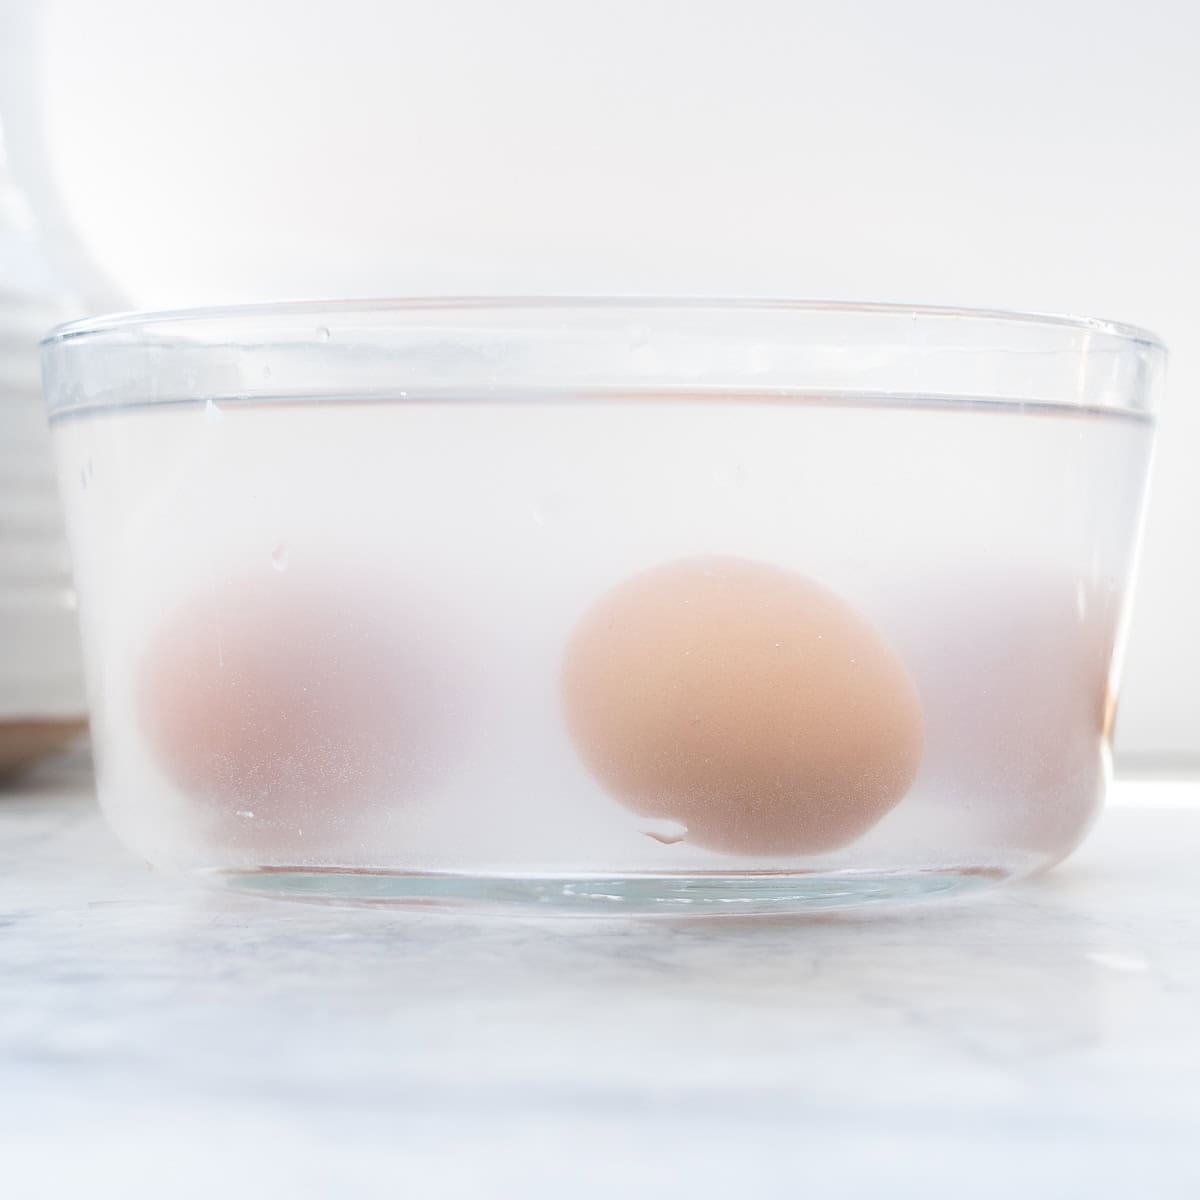 Three eggs visible in a microwave proof bowl filled with water.